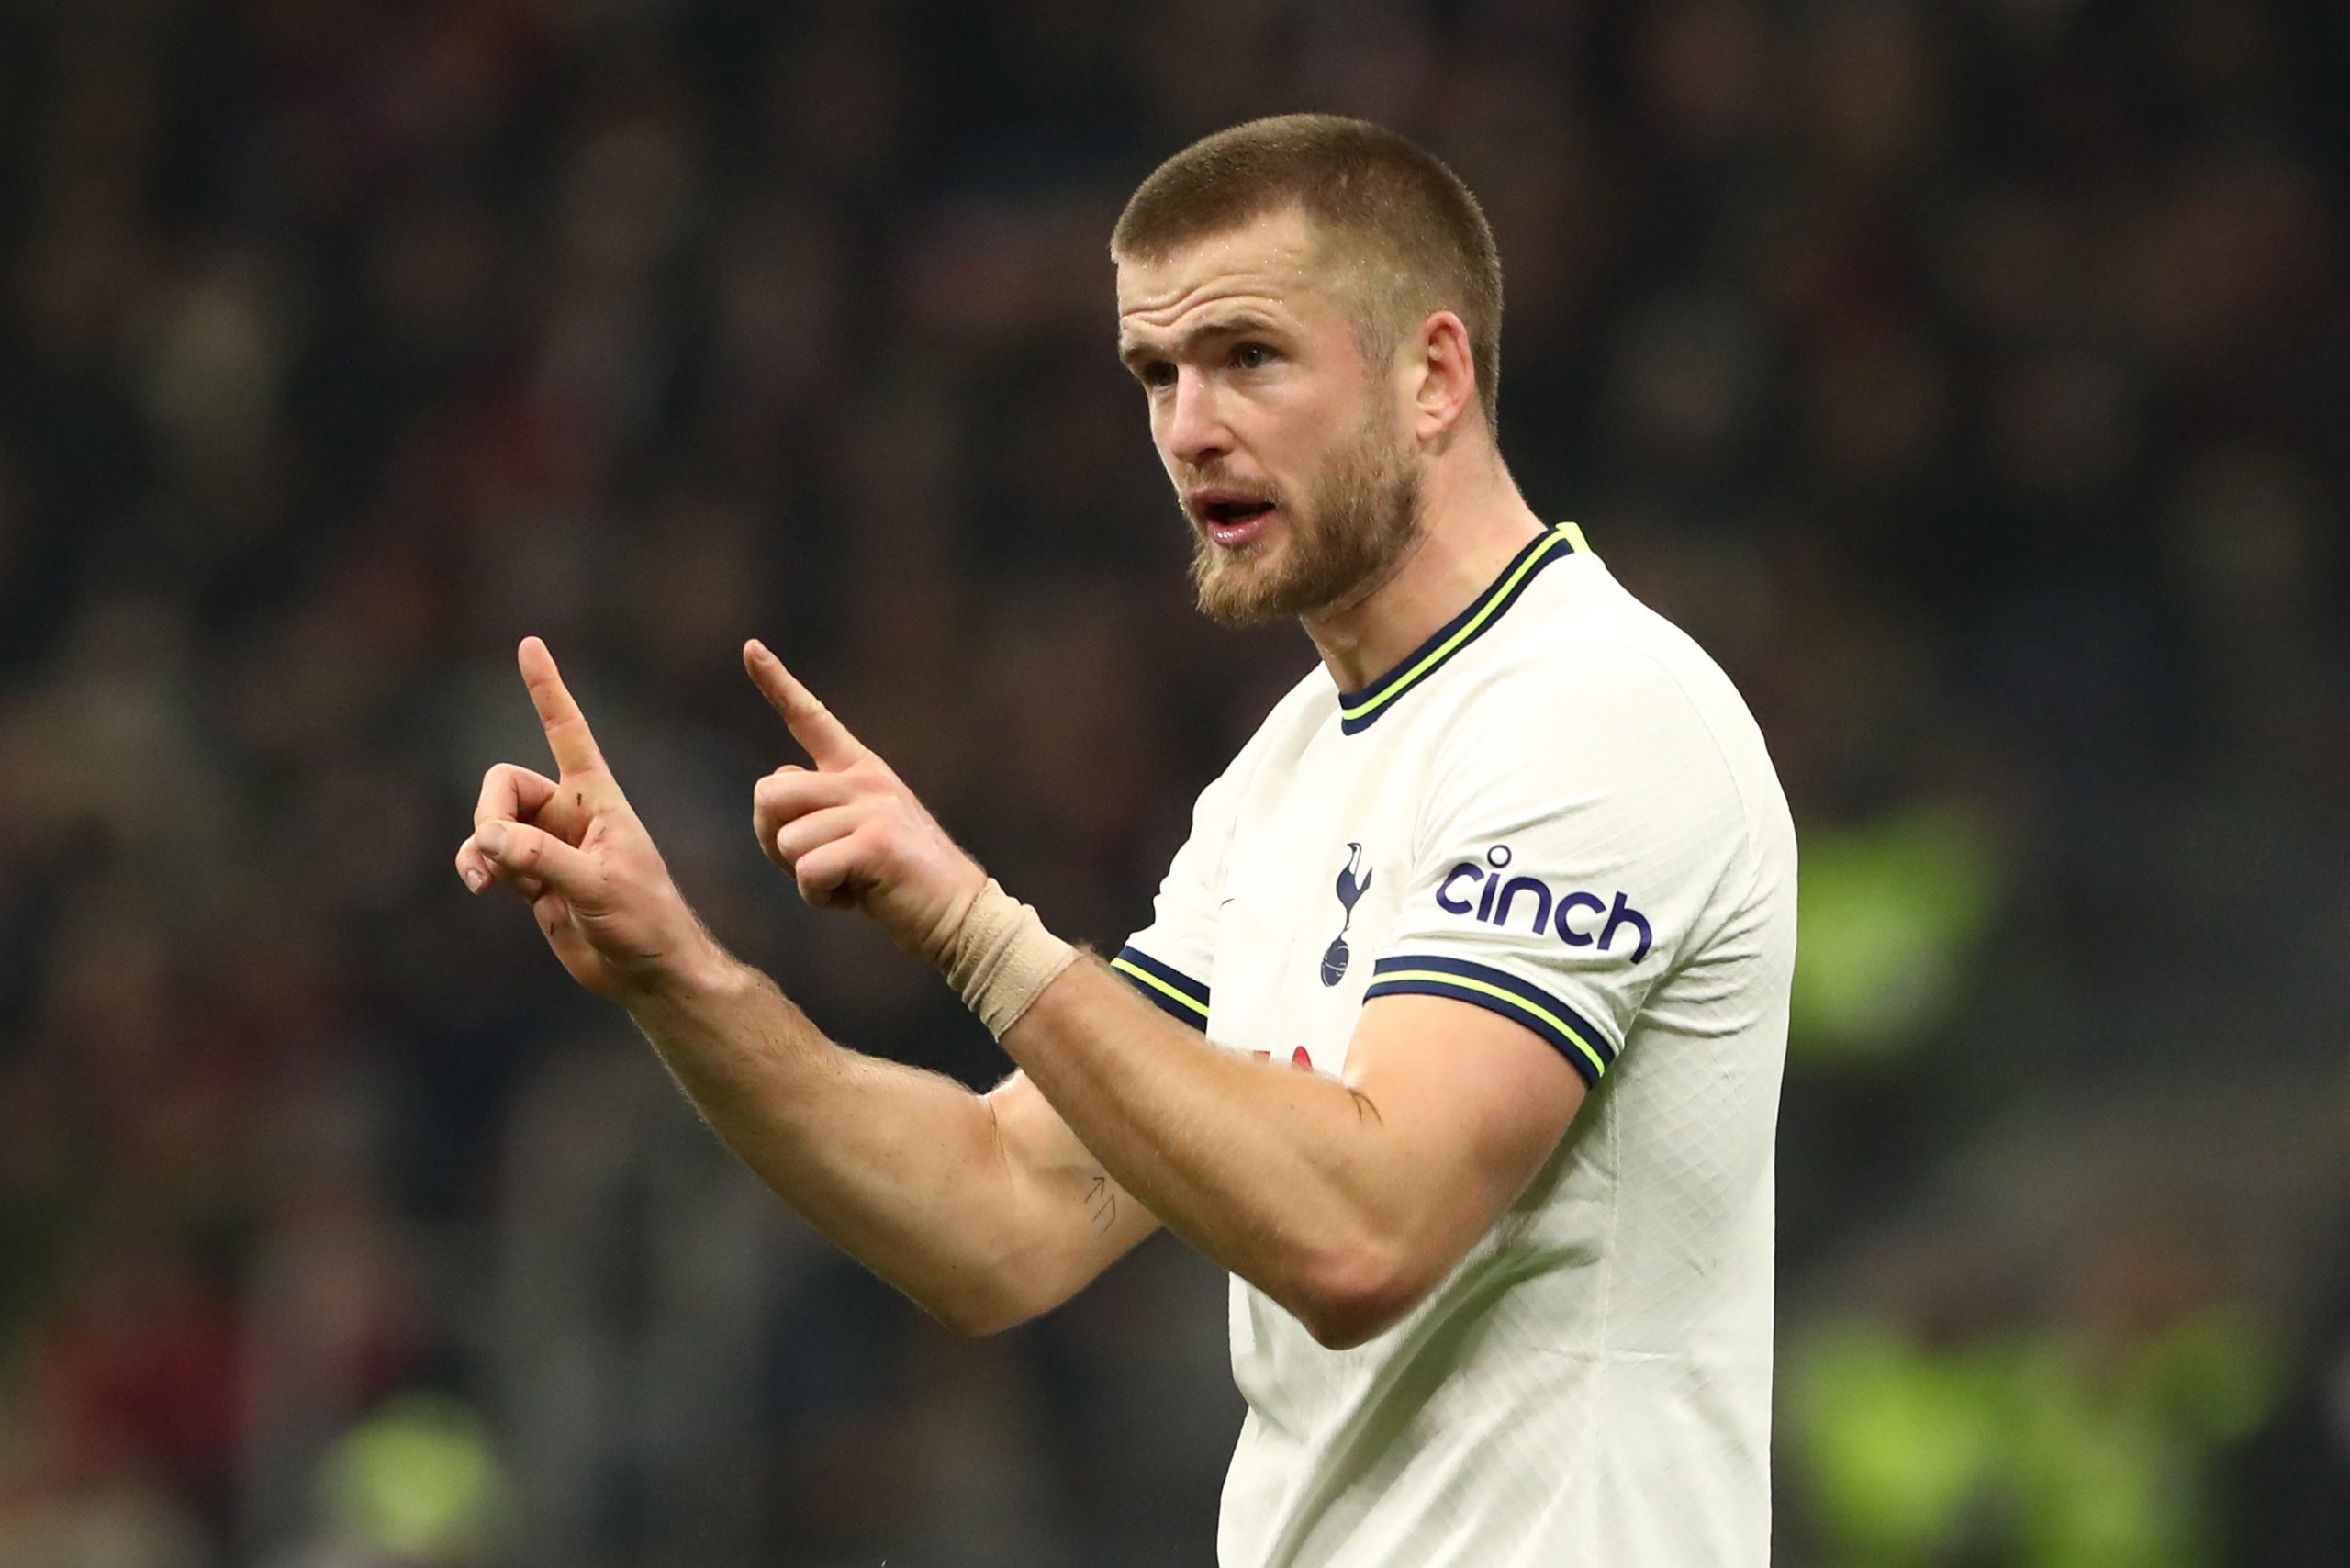 Tottenham Hotspur are in a tense situation surrounding Eric Dier.